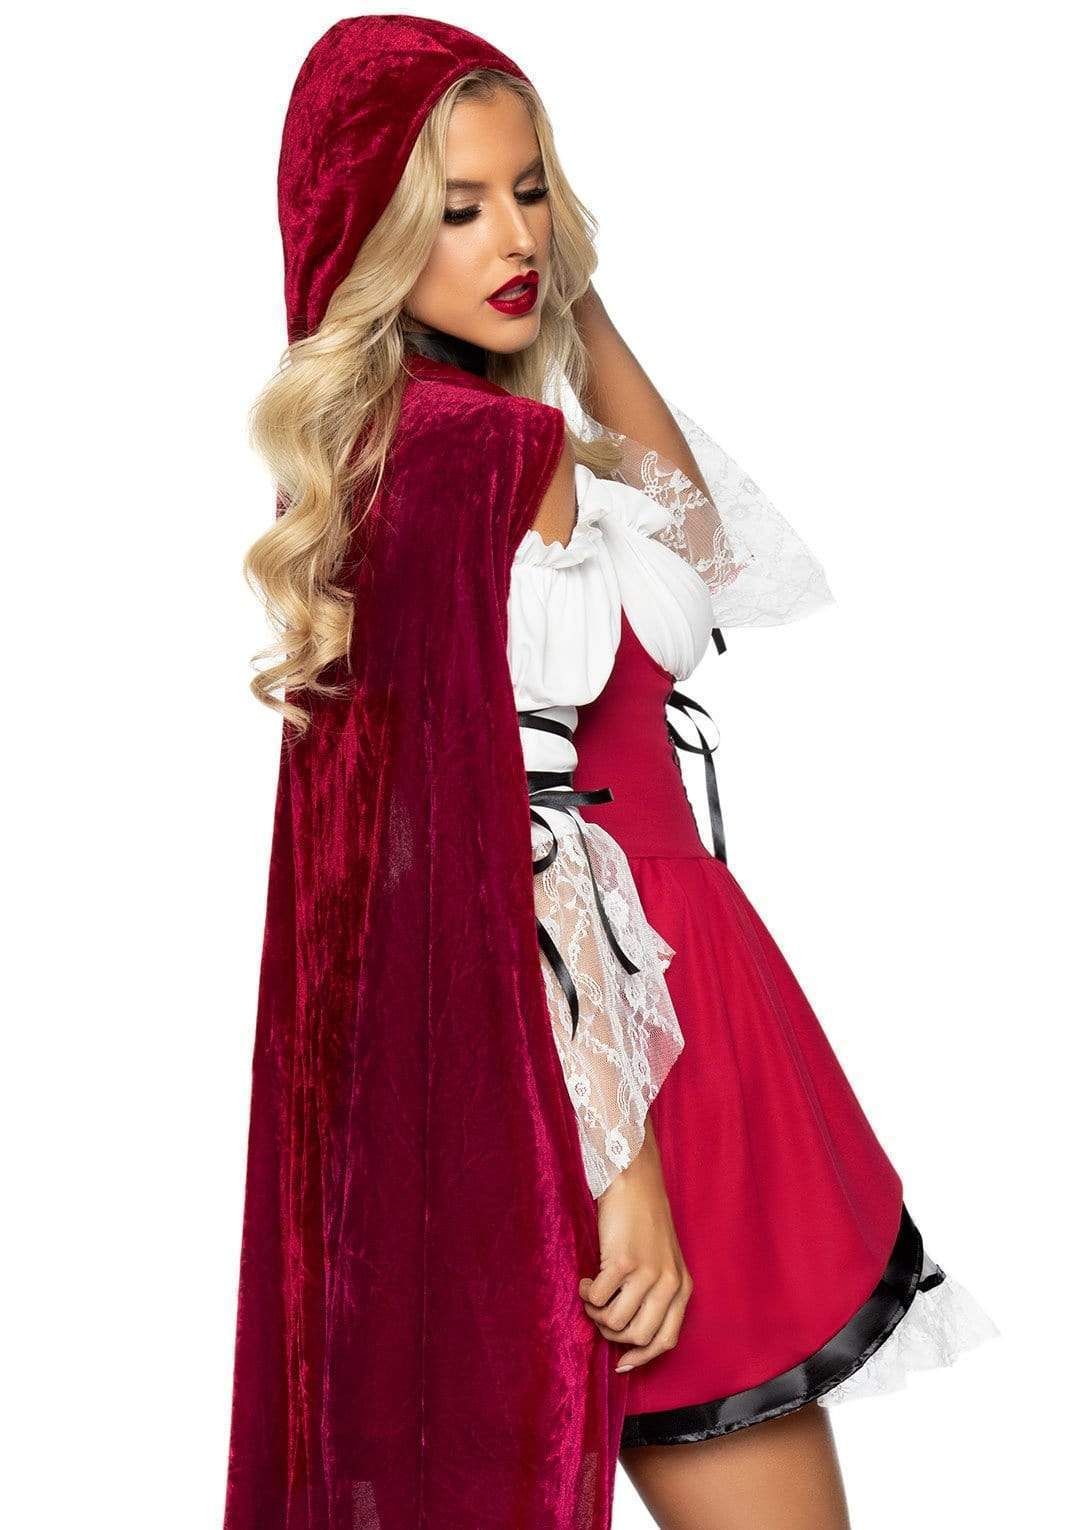 Storybook Red Riding Hood Lace Trimmed Peasant Dress and Attached Cape